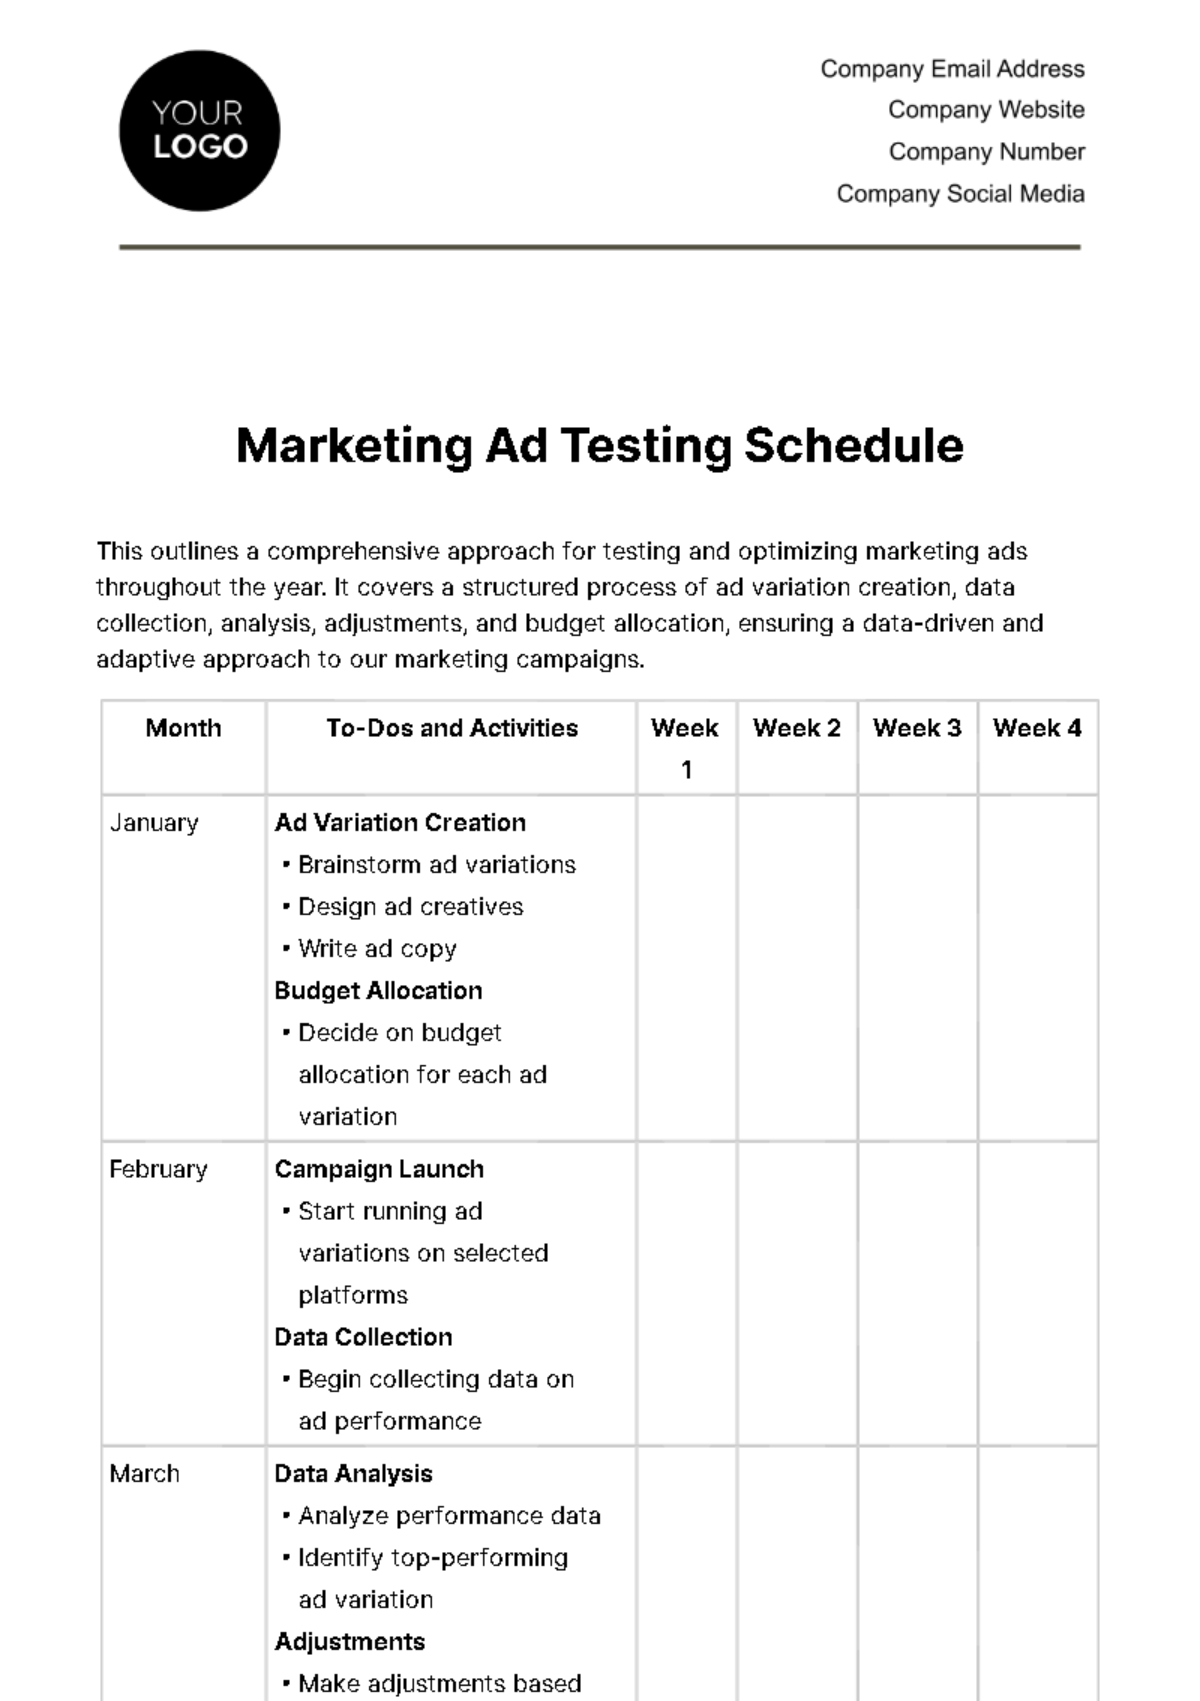 Marketing Ad Testing Schedule Template